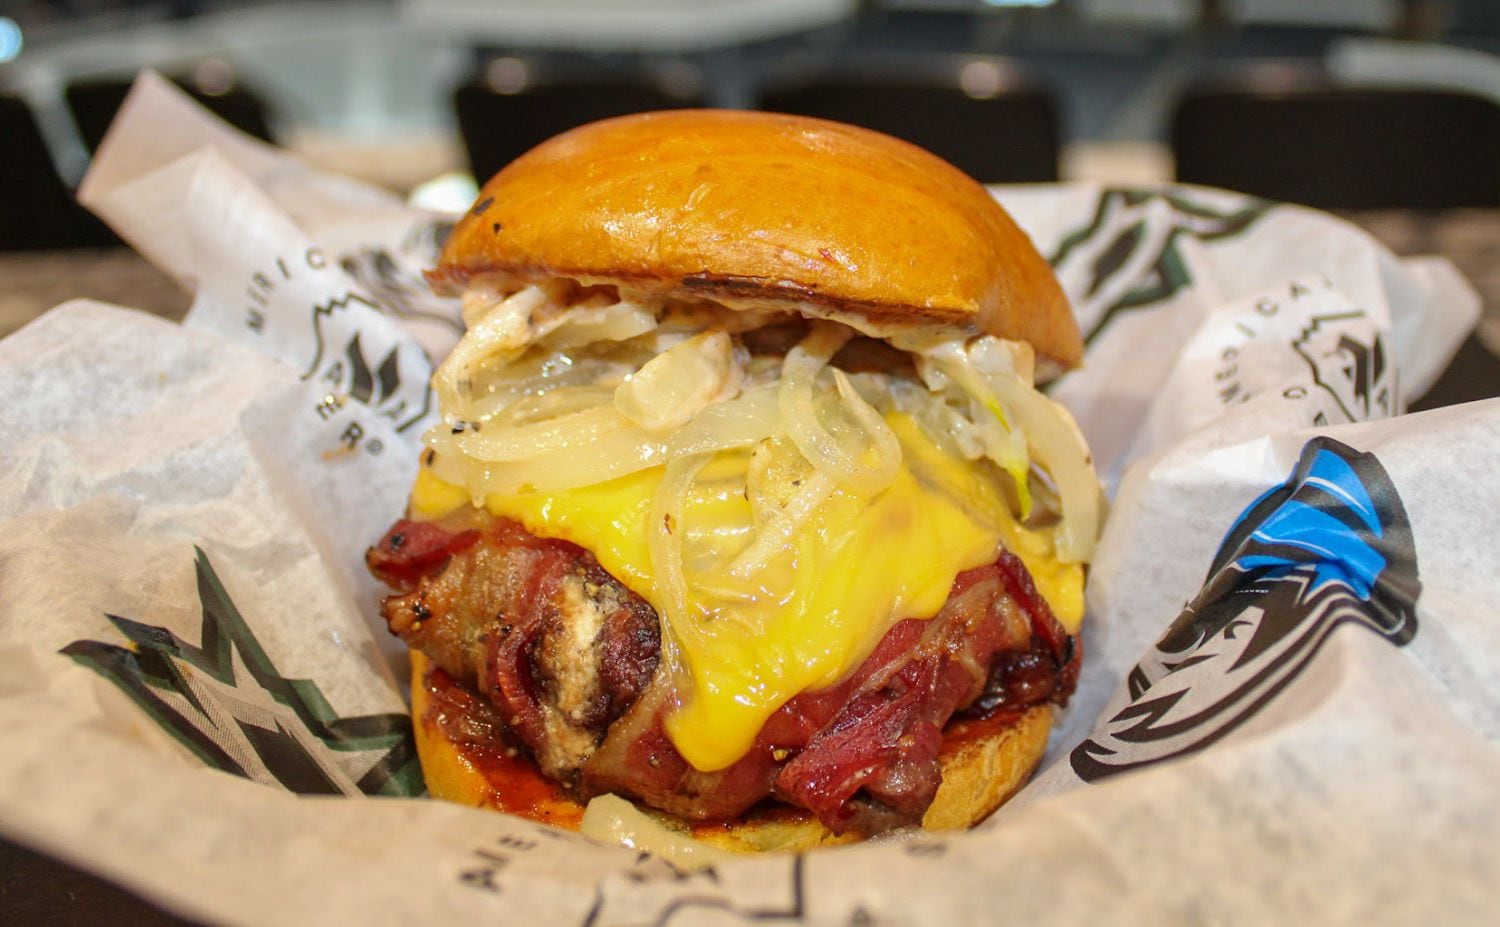 A Smoked Bacon-Wrapped Juicy Lucy is one of the new options at Mavericks or Stars' games.